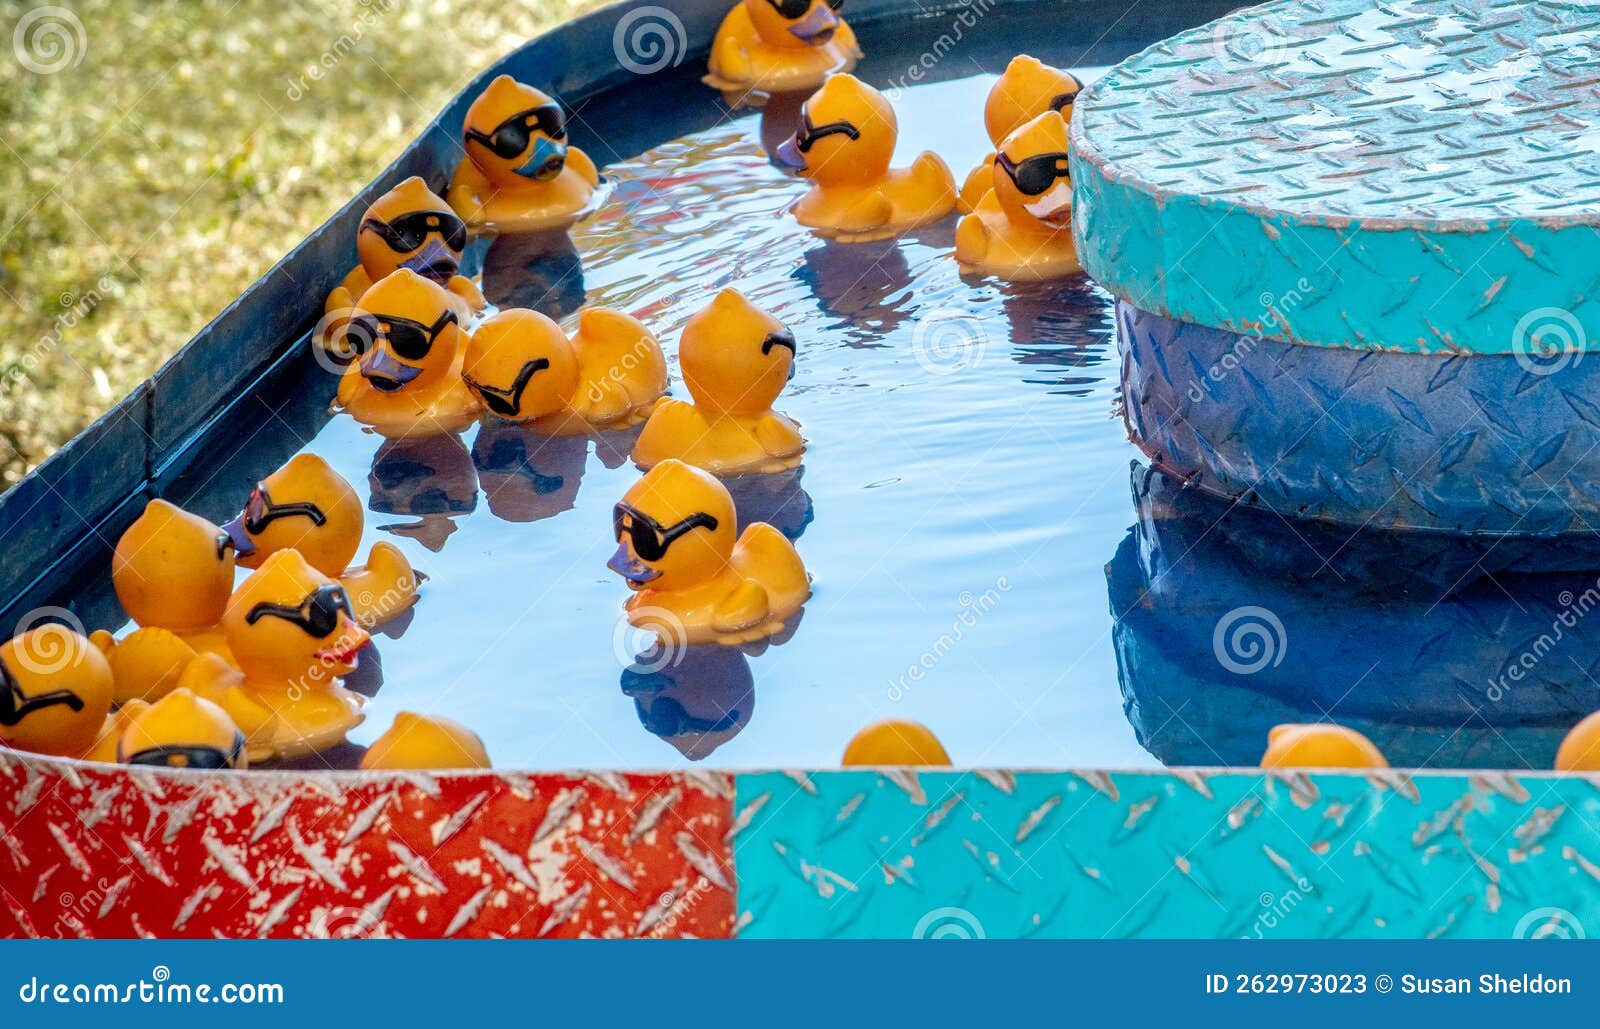 Pick a duck game at a fair stock image. Image of group - 262973023